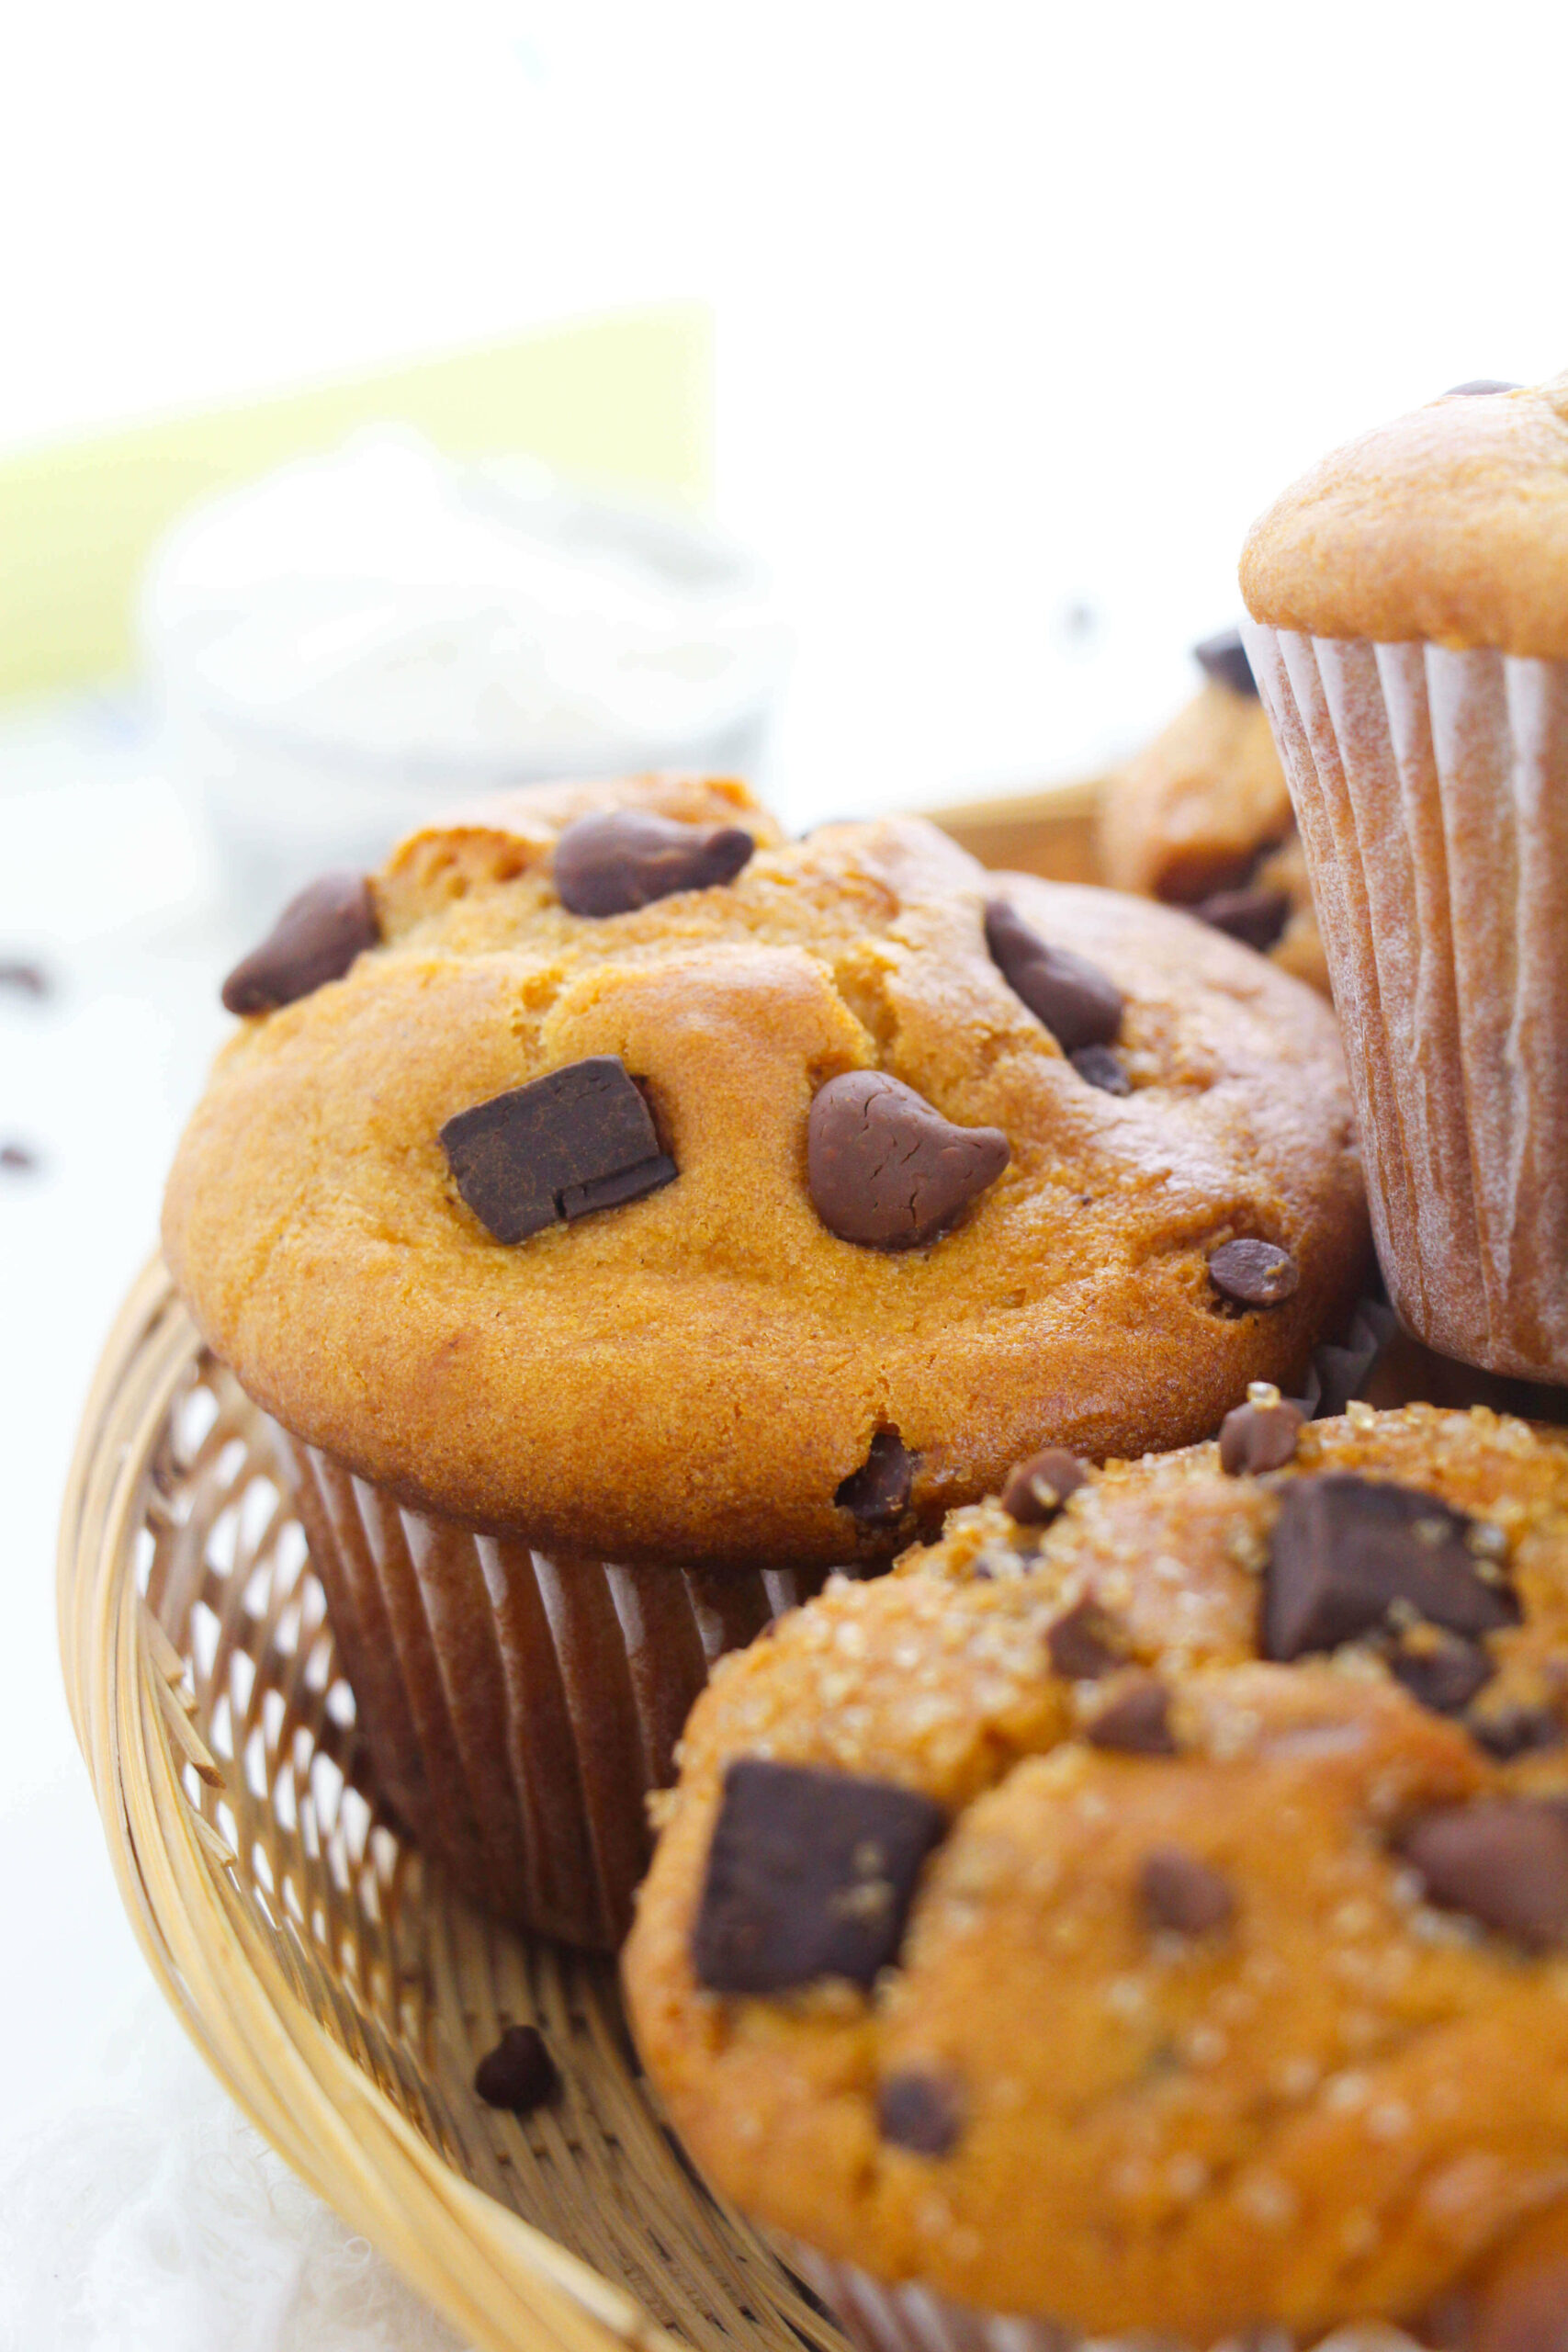 A side view of the jumbo chocolate chip muffins.